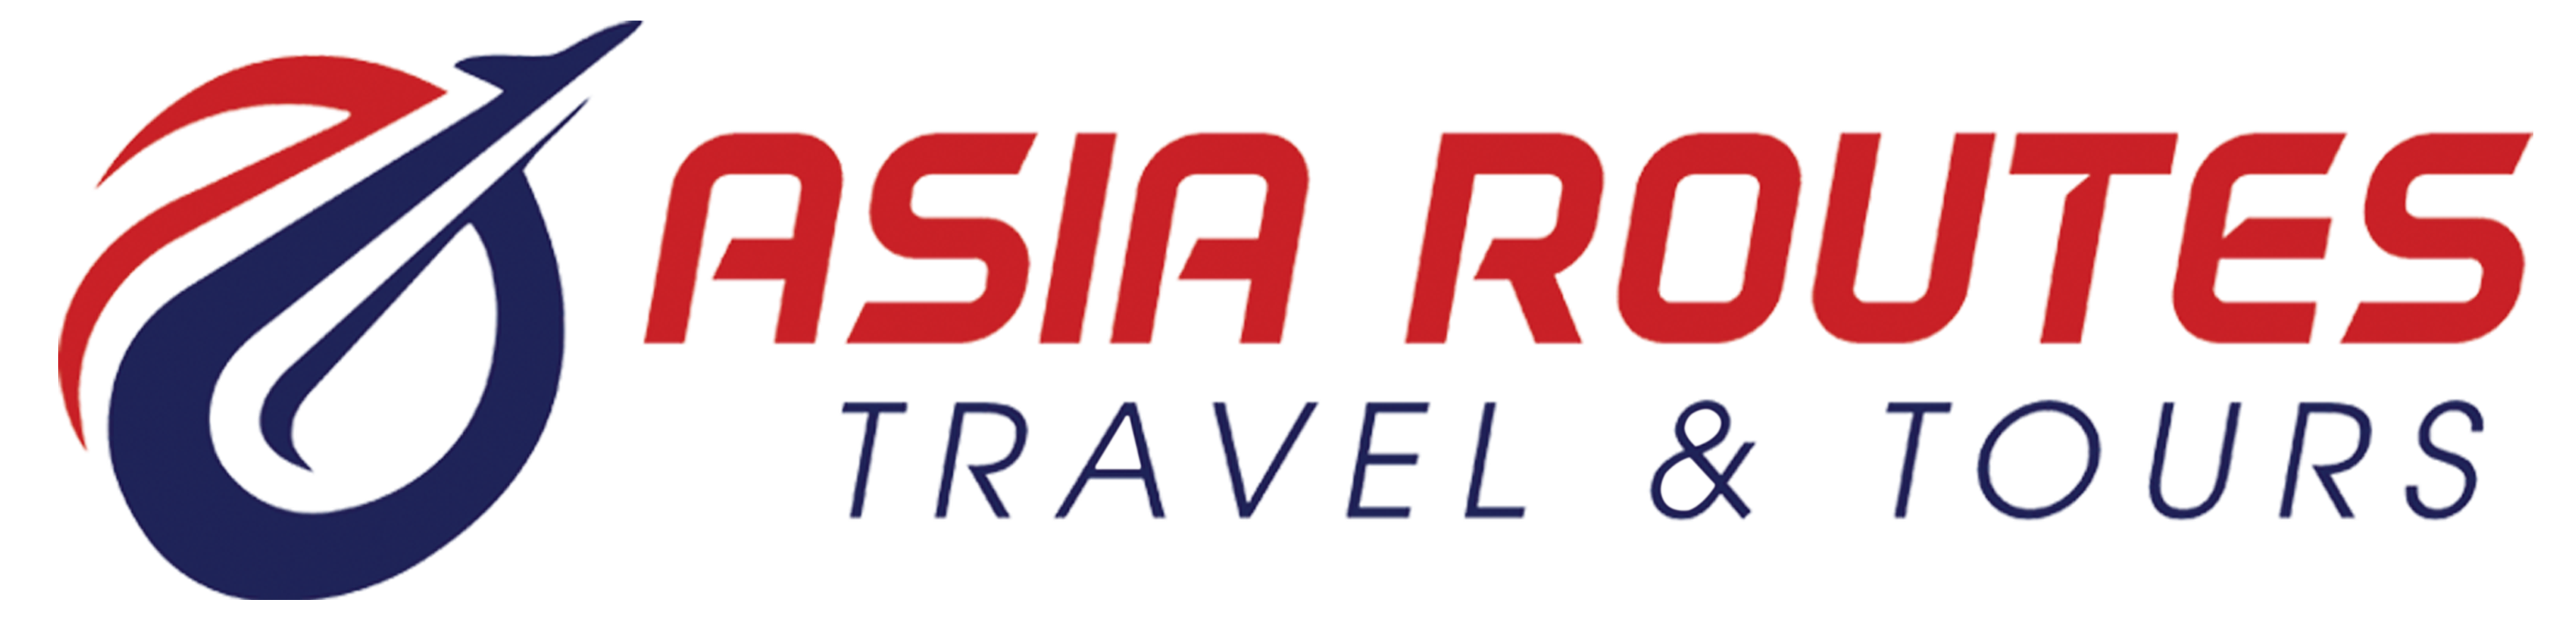 Asia Routes Travel & Tours |   Contact Us